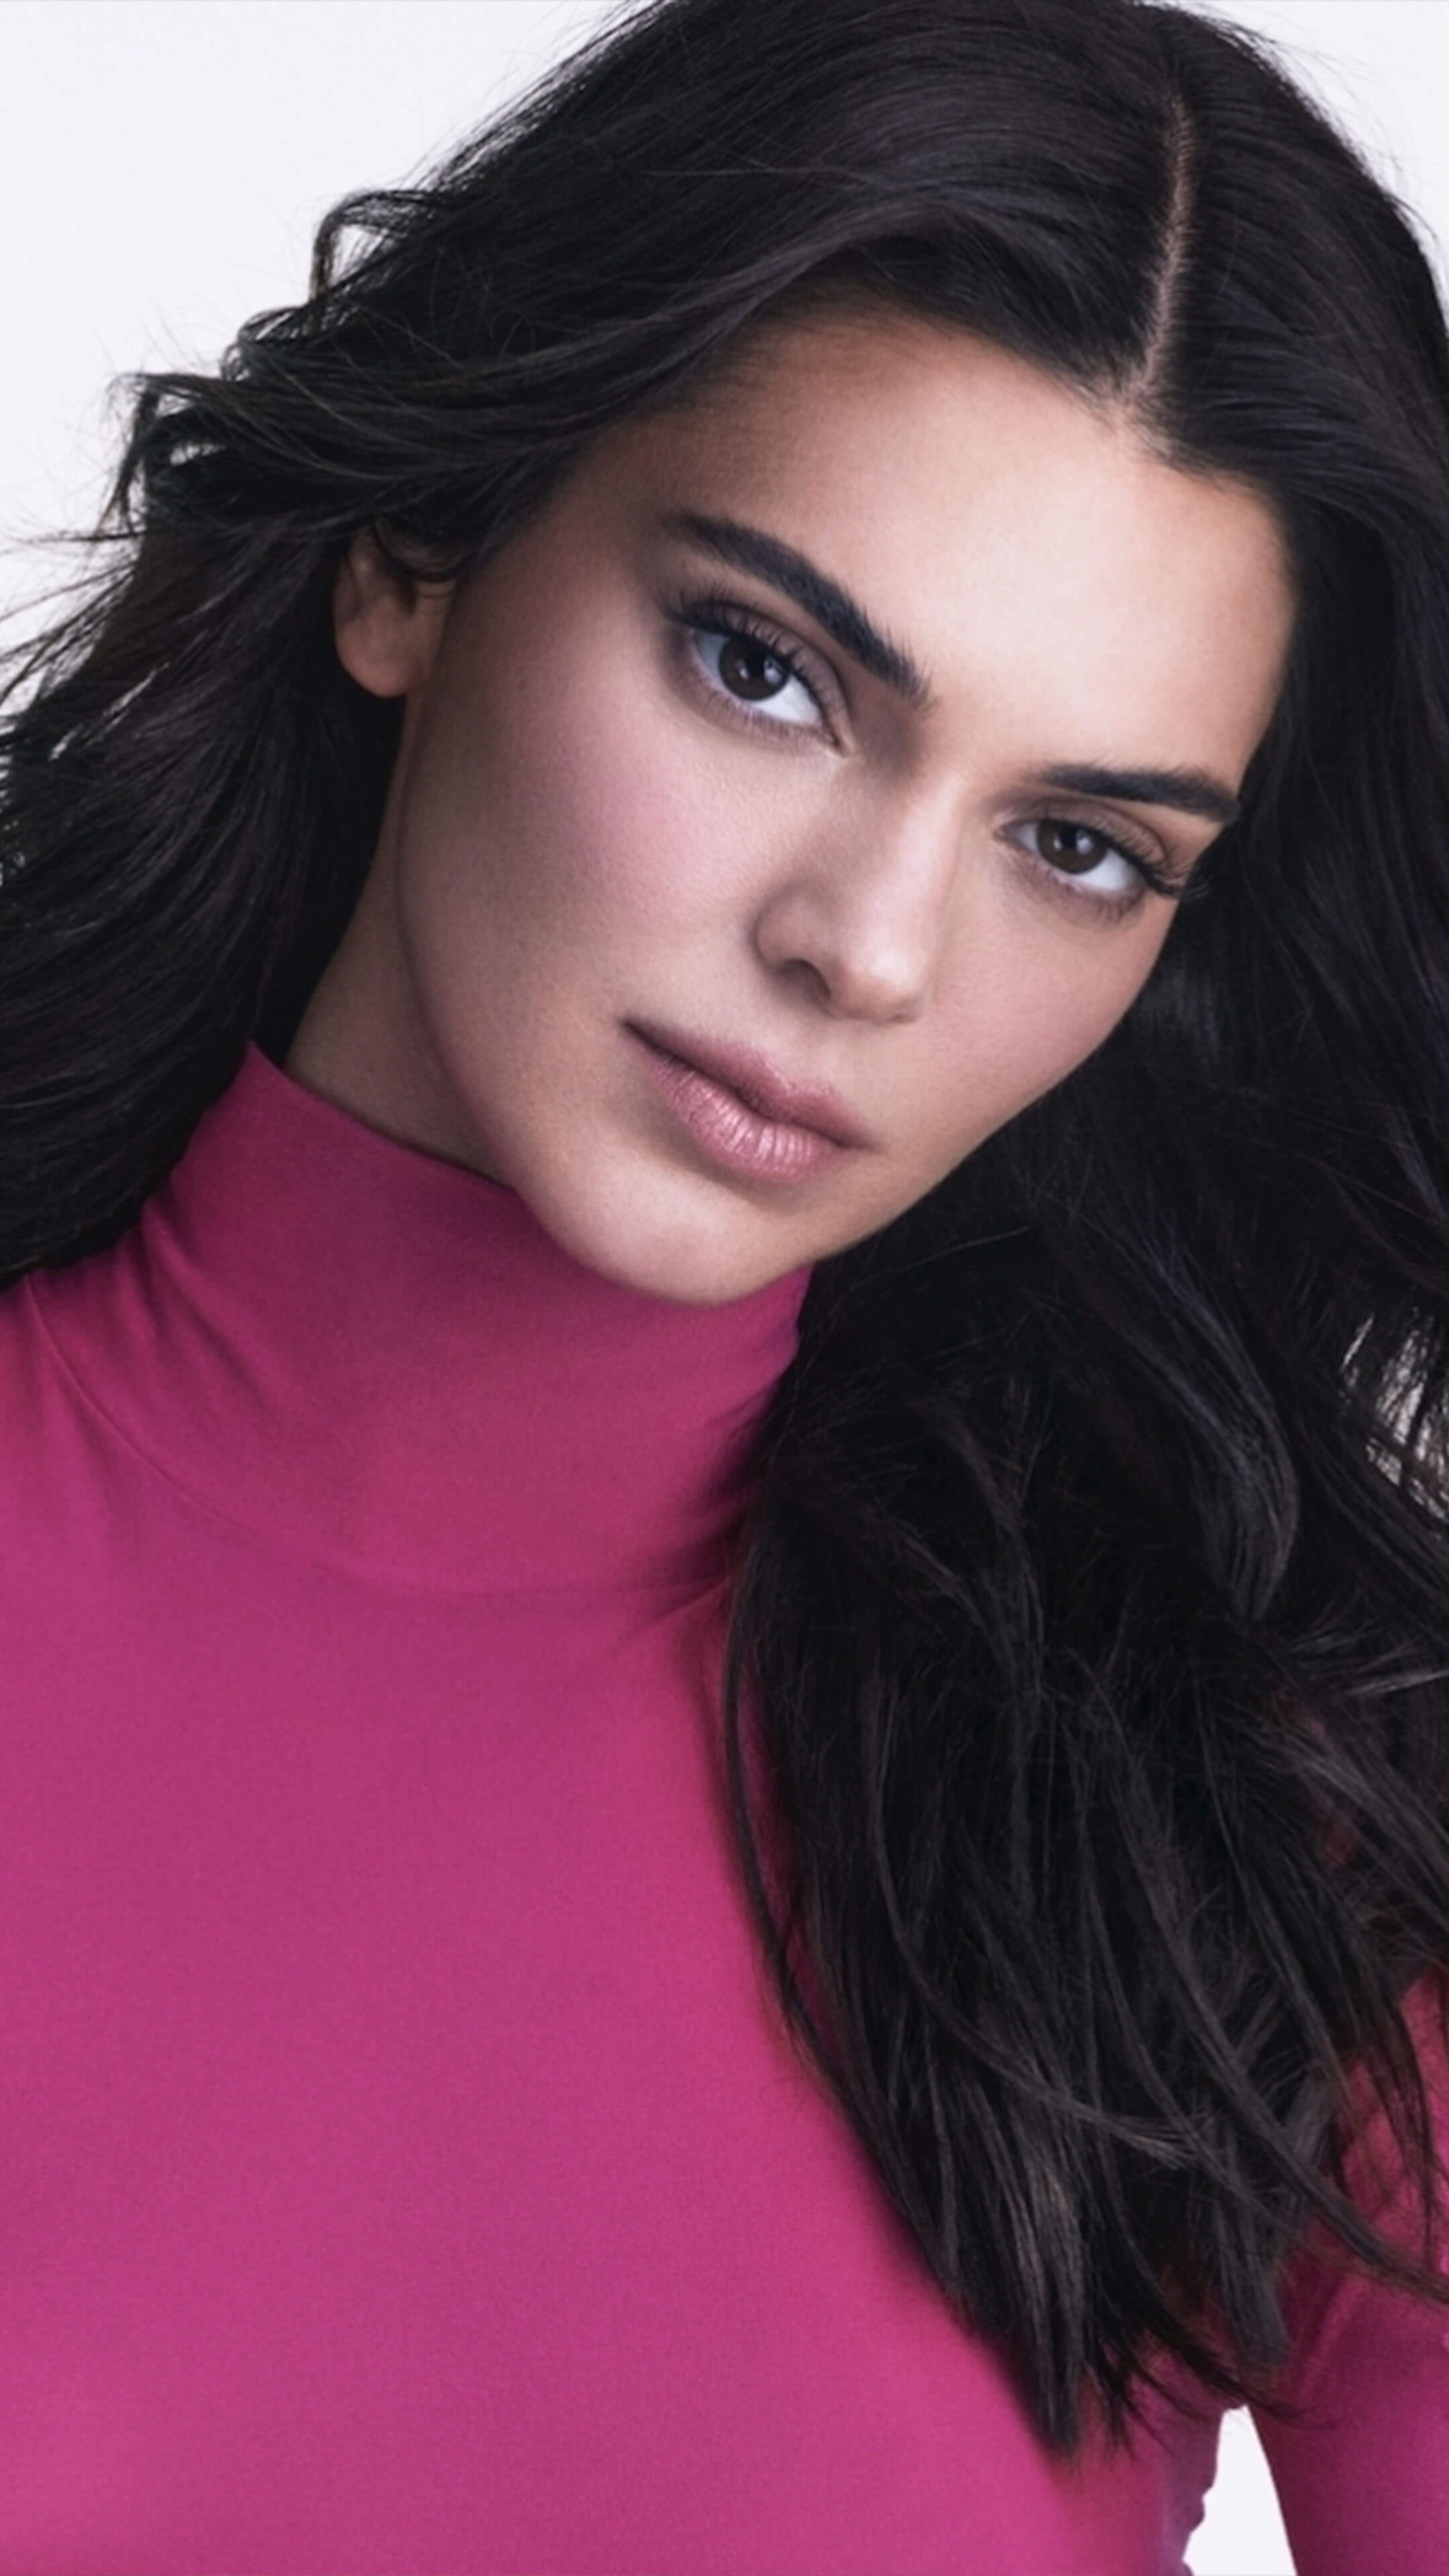 Kendall Jenner editorial photo. Image of celebrities - 166132926